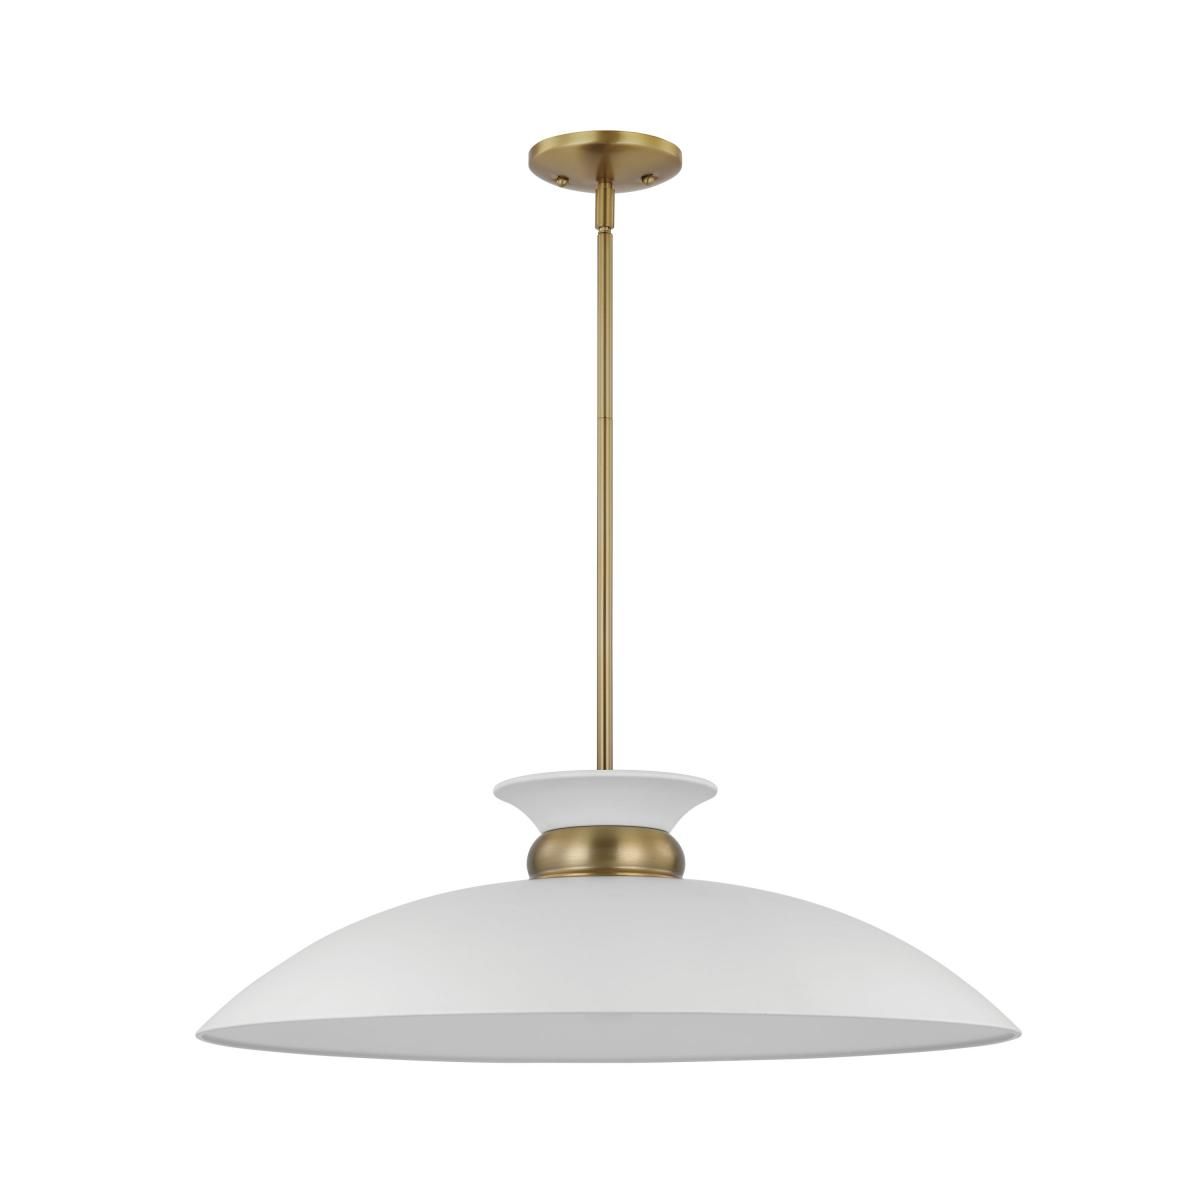 Perkins 24 in. Pendant Light Matte White with Polished Nickel